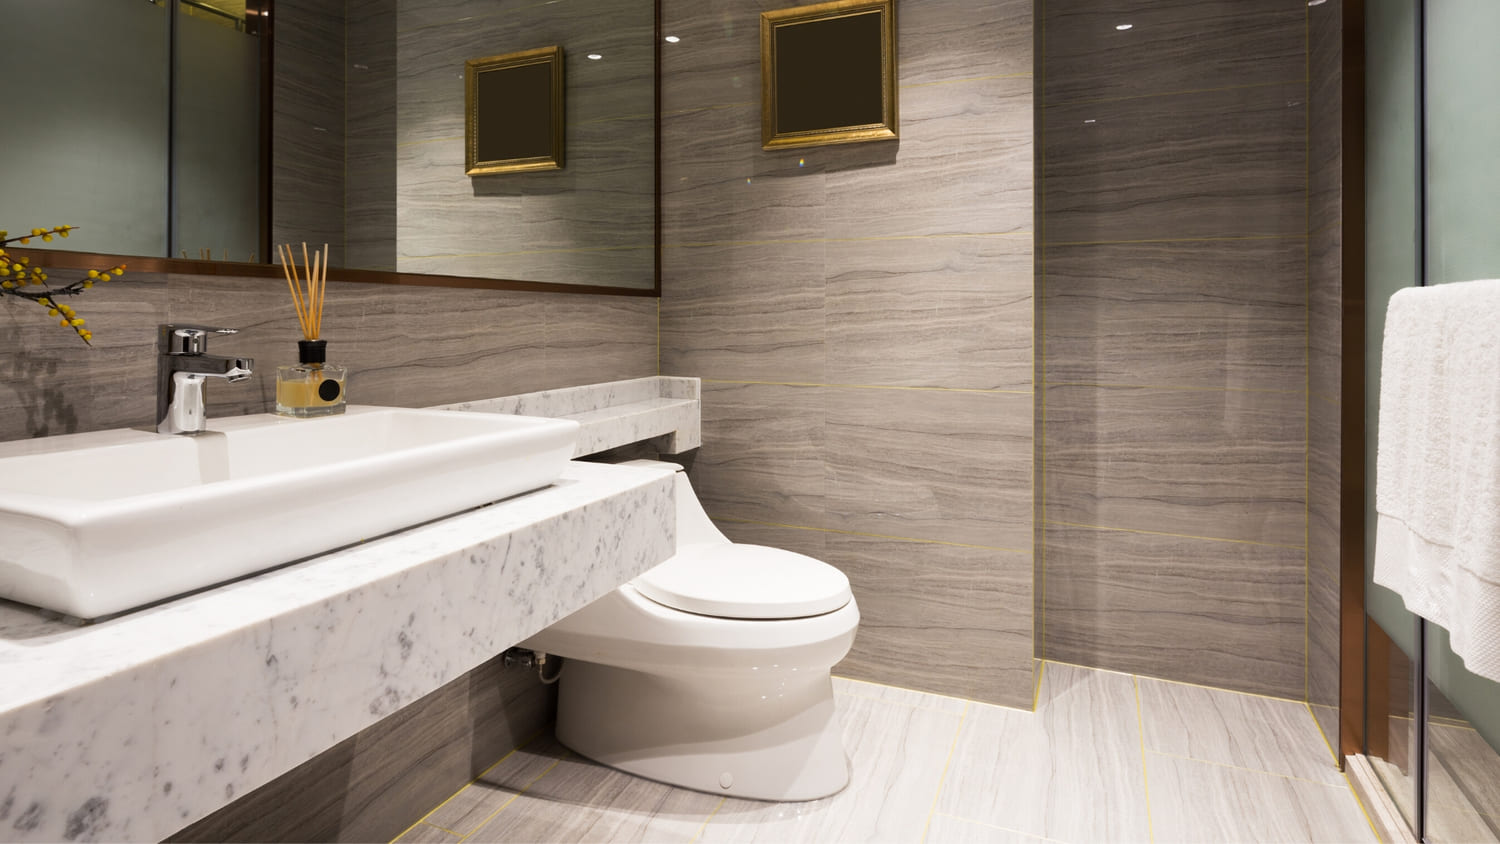 A modern and high end bathroom with gray tile on floors and walls